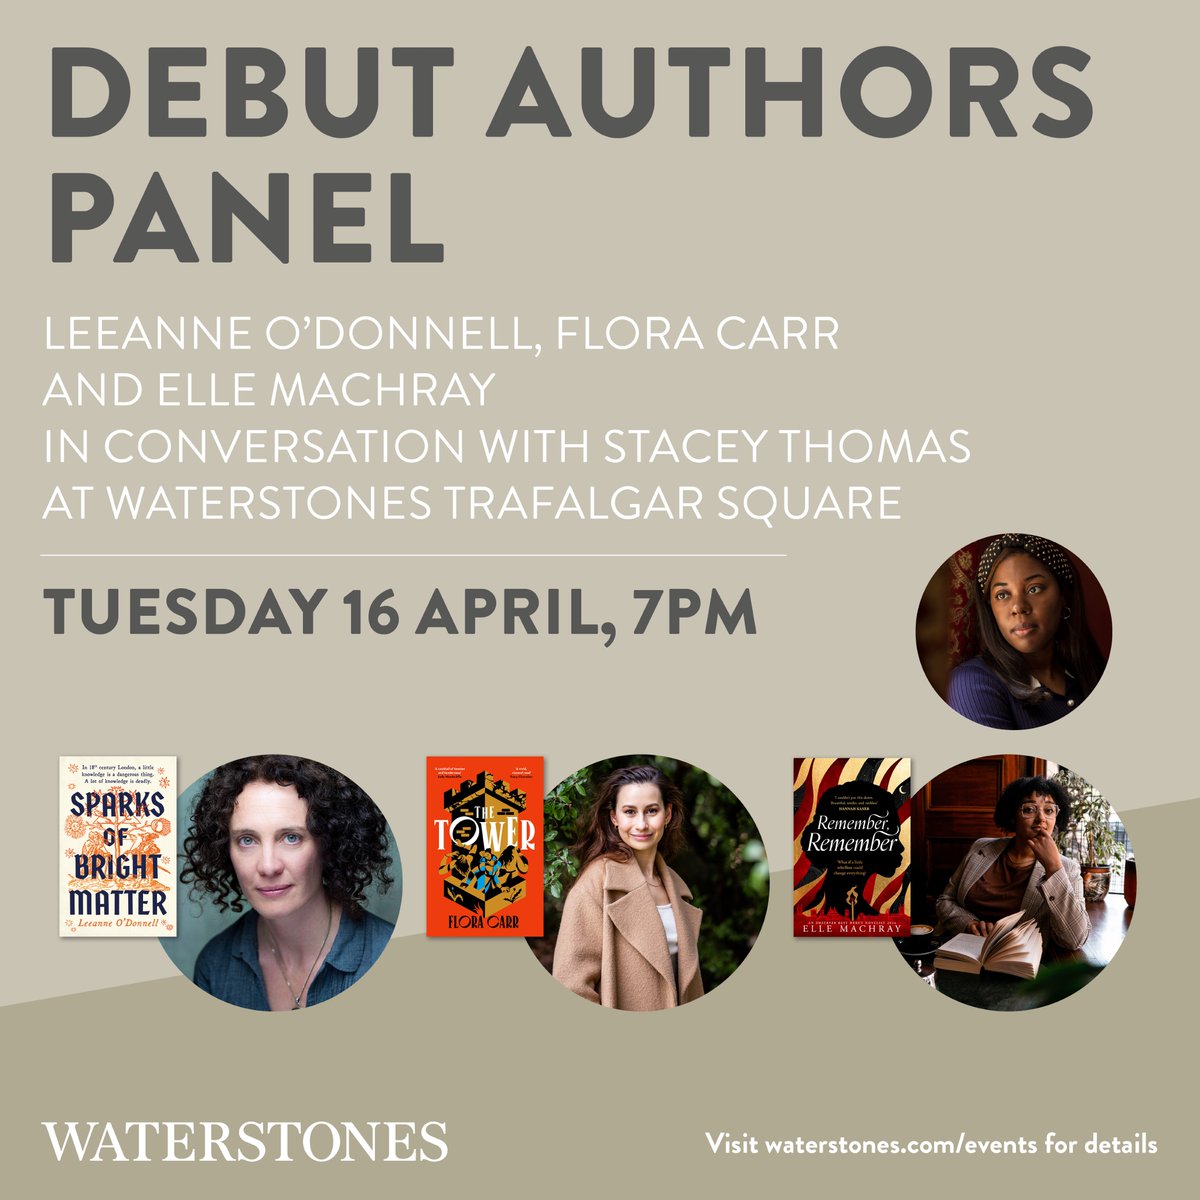 Very excited to see the author of #SPARKSOFBRIGHTMATTER Leeanne O’Donnell chatting historical fiction with @floracarr_, @elleandthebooks and @Staceyv_Thomas on the 16th April @WaterstonesTraf @eriu_books @bonnierbooks_uk @BlakeFriedmann waterstones.com/events/debut-a…